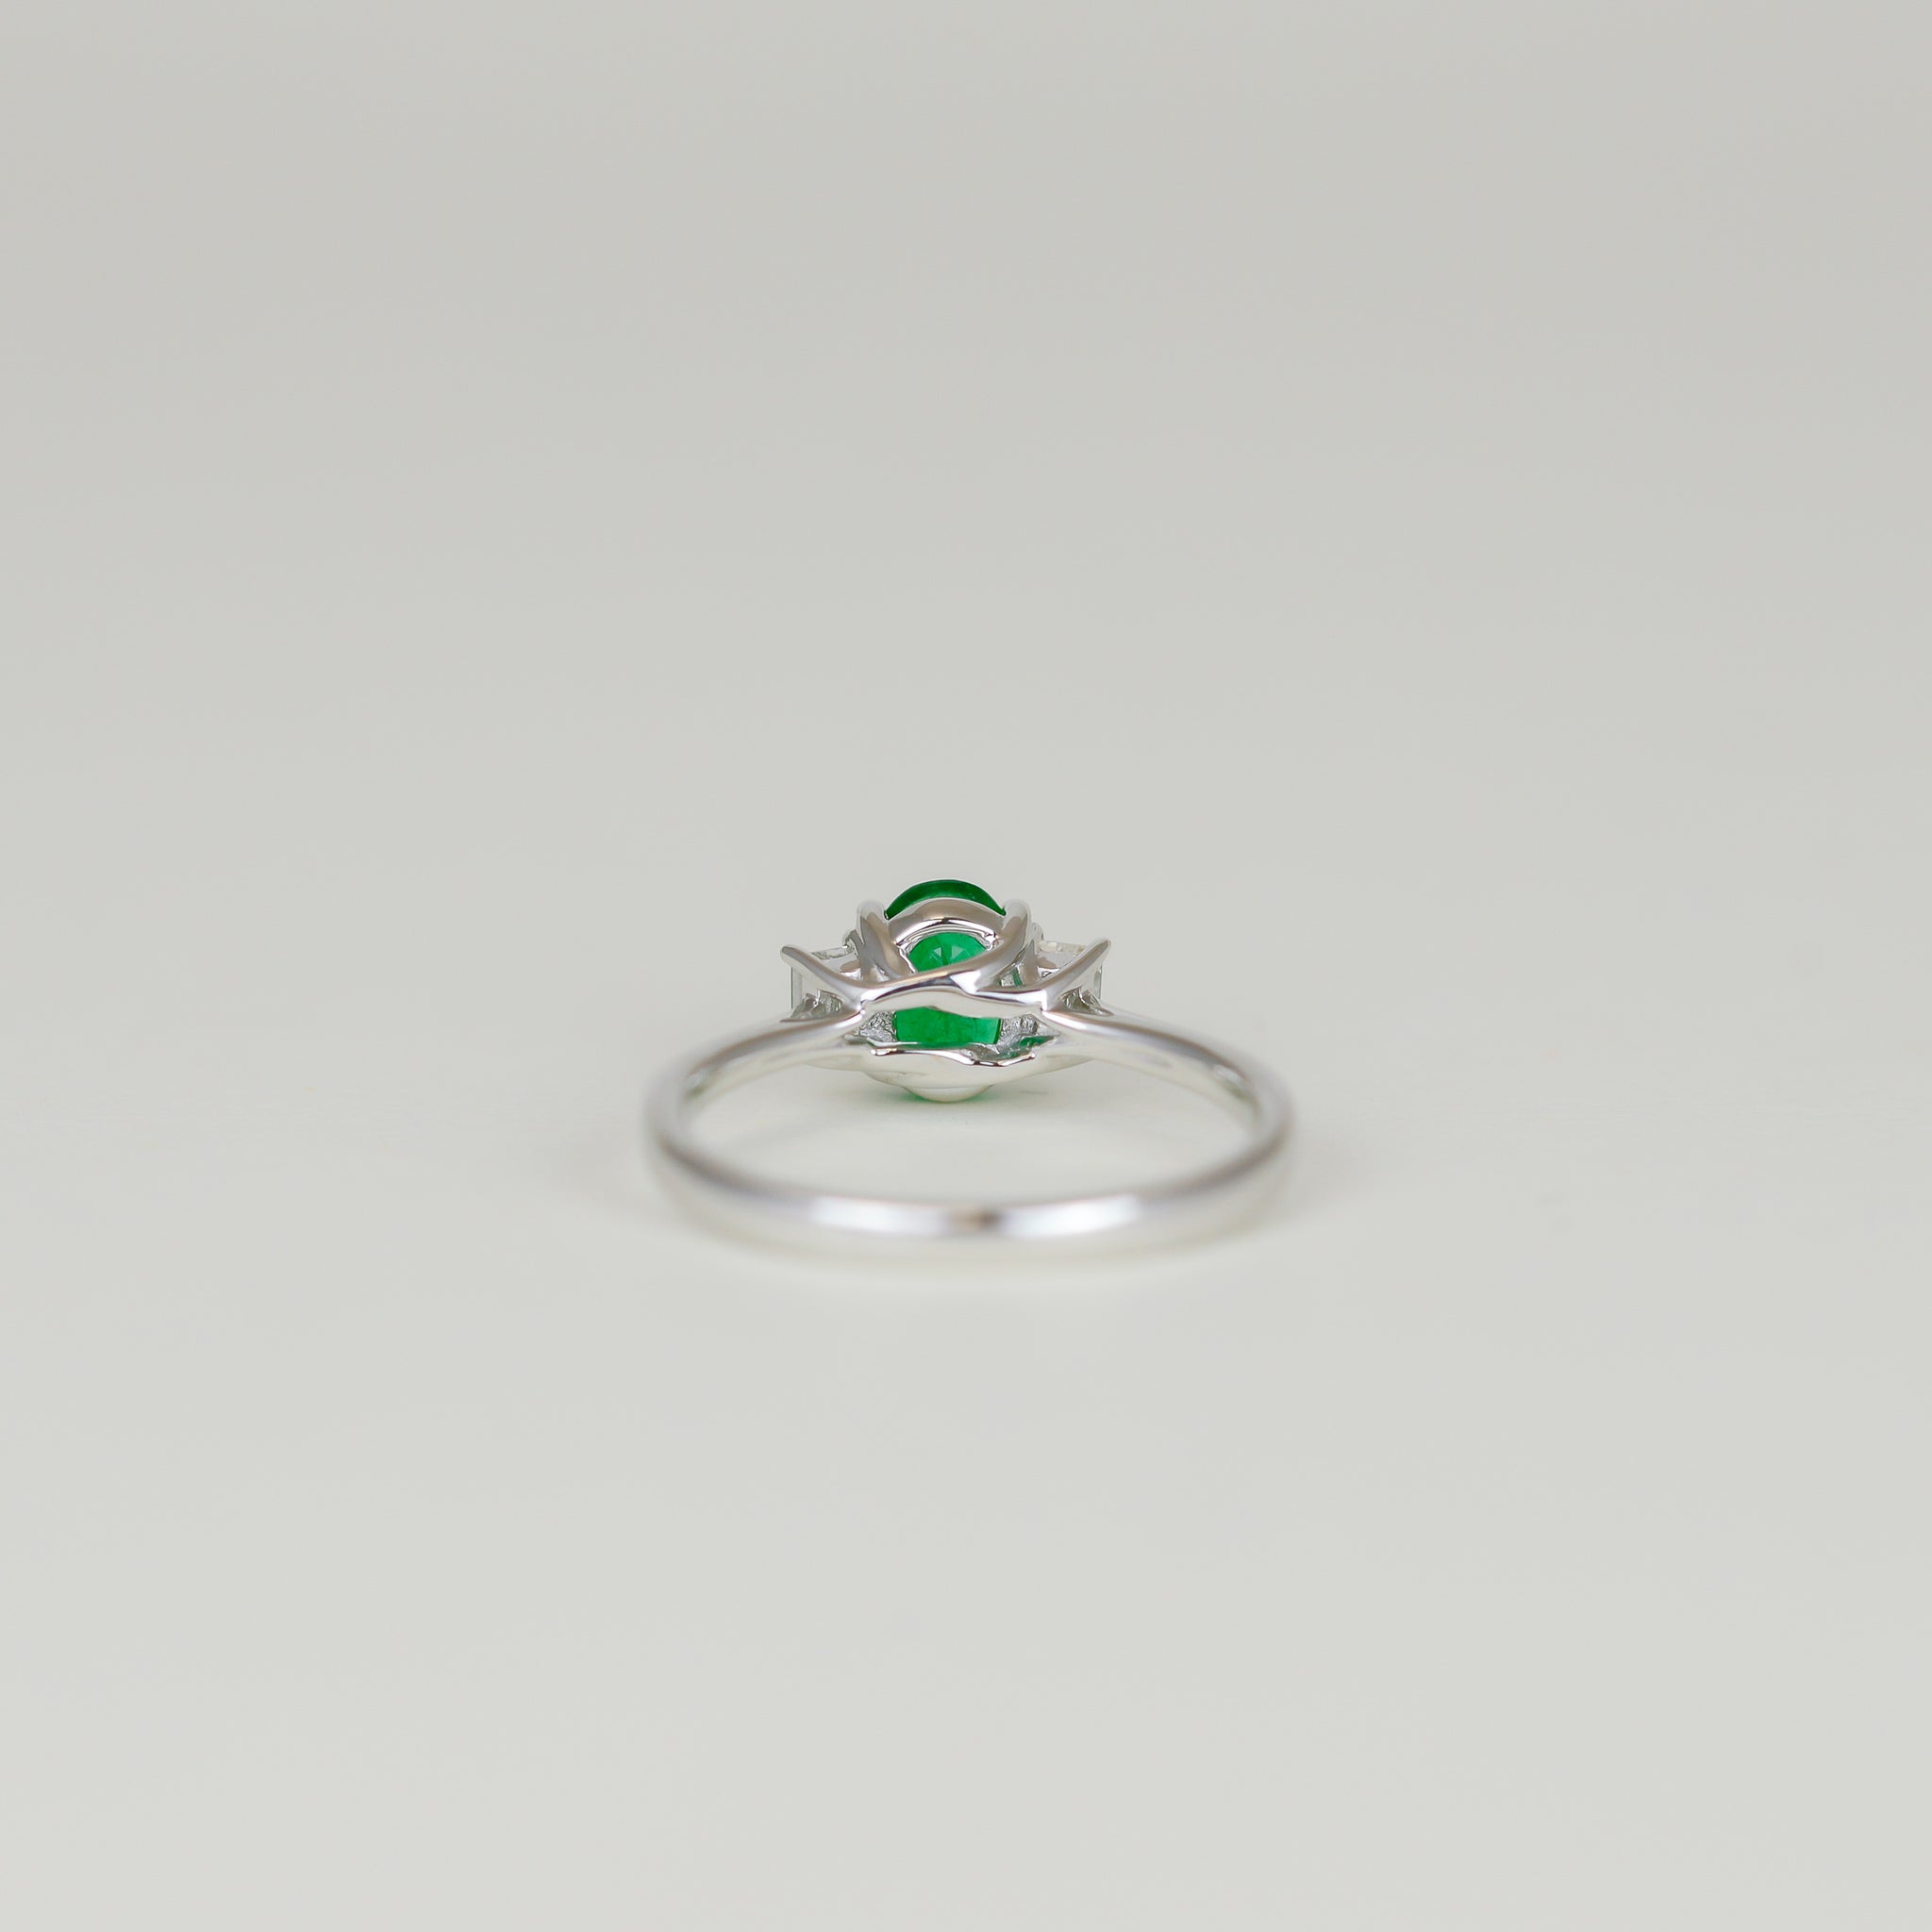 18ct White Gold 0.69ct Oval Emerald and Diamond Ring